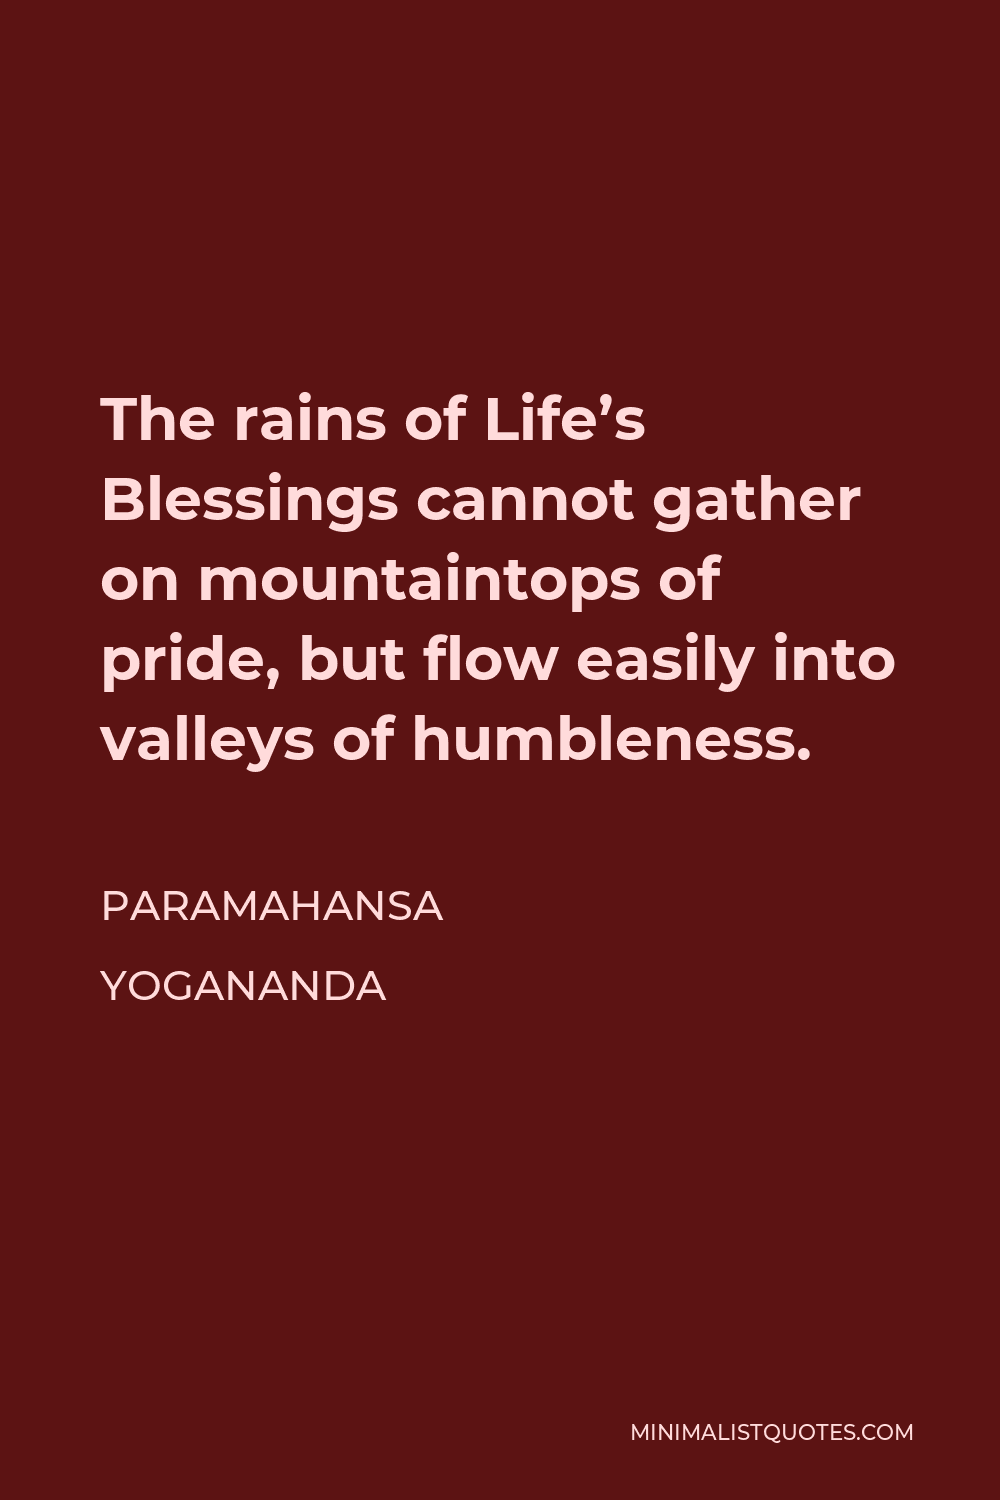 Paramahansa Yogananda Quote - The rains of Life’s Blessings cannot gather on mountaintops of pride, but flow easily into valleys of humbleness.